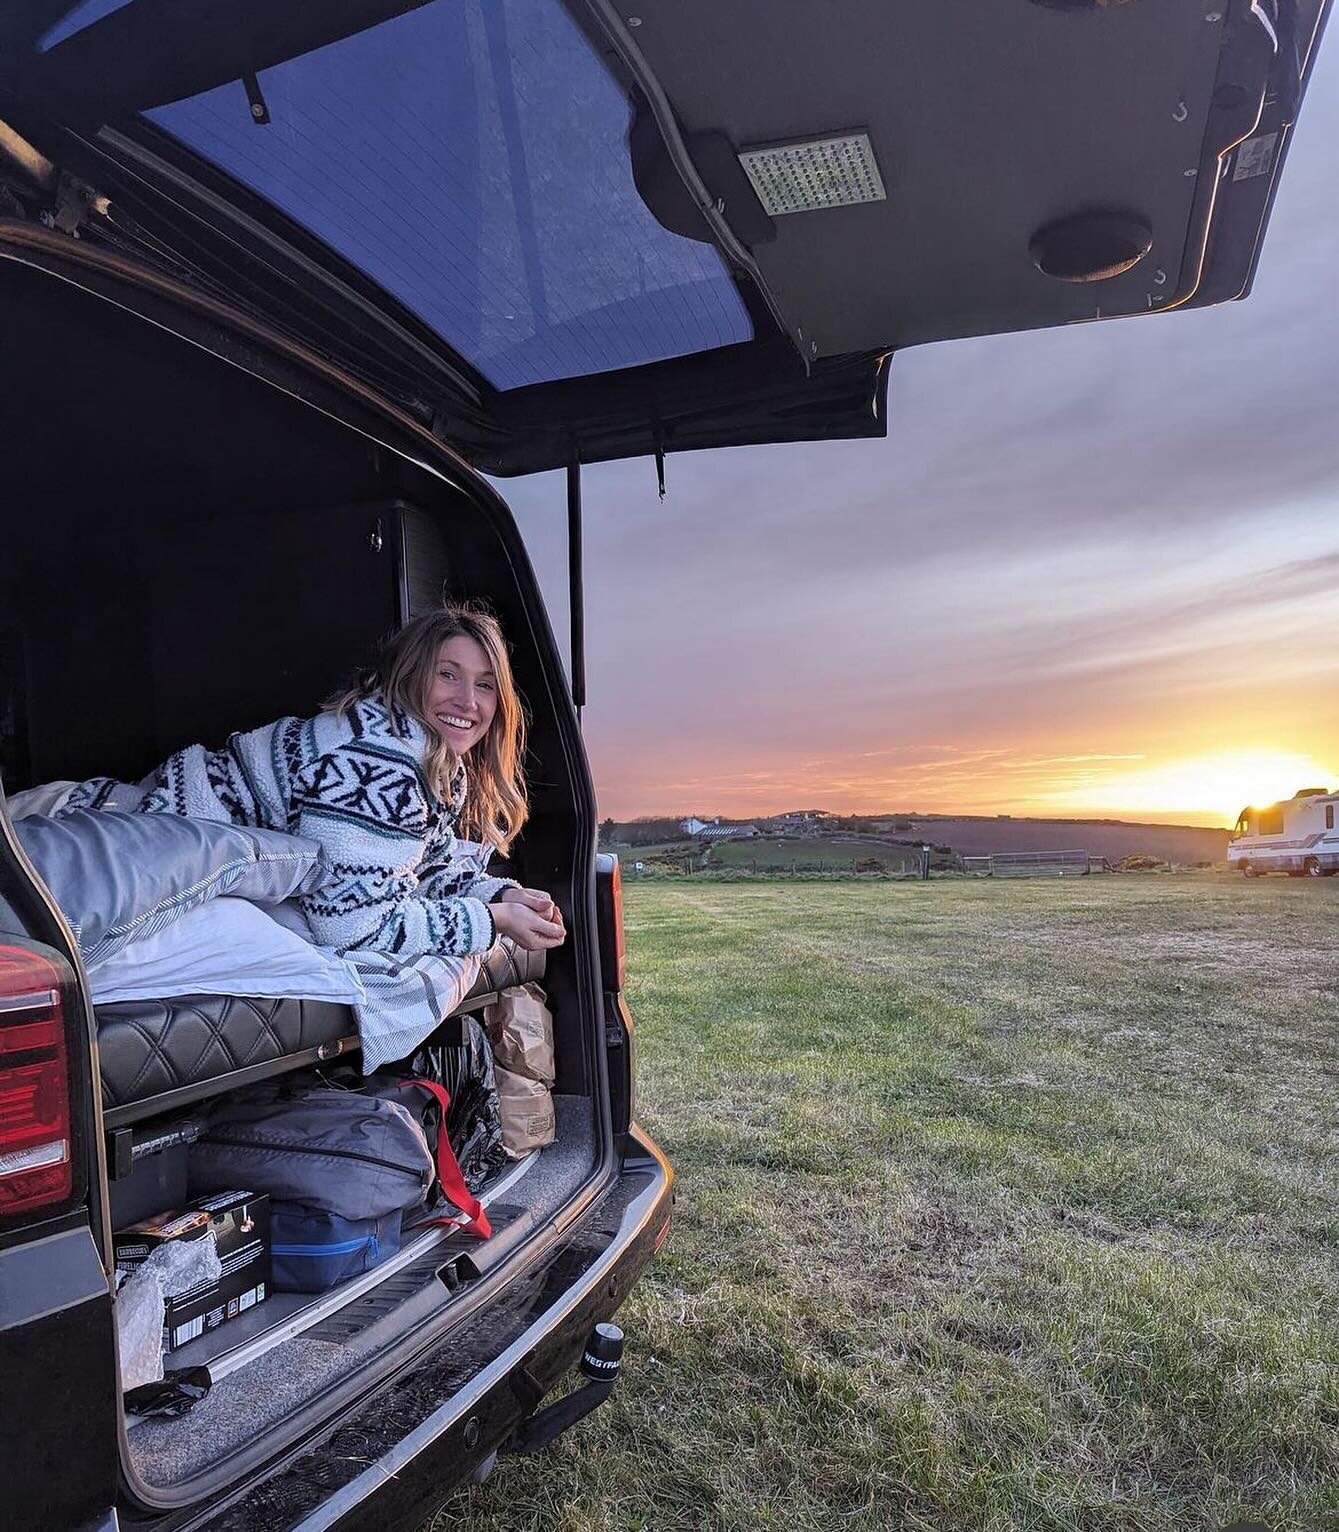 Enjoy the sunset for the comfort of your camper 🌅😃 thank you @shelley_lewis_ for sharing! We&rsquo;re so glad you enjoyed your stay with us! 

Come and enjoy the view at Celtic Camping 🏕️ Book now on www.celticcamping.co.uk 🏕️

#campingholiday #u